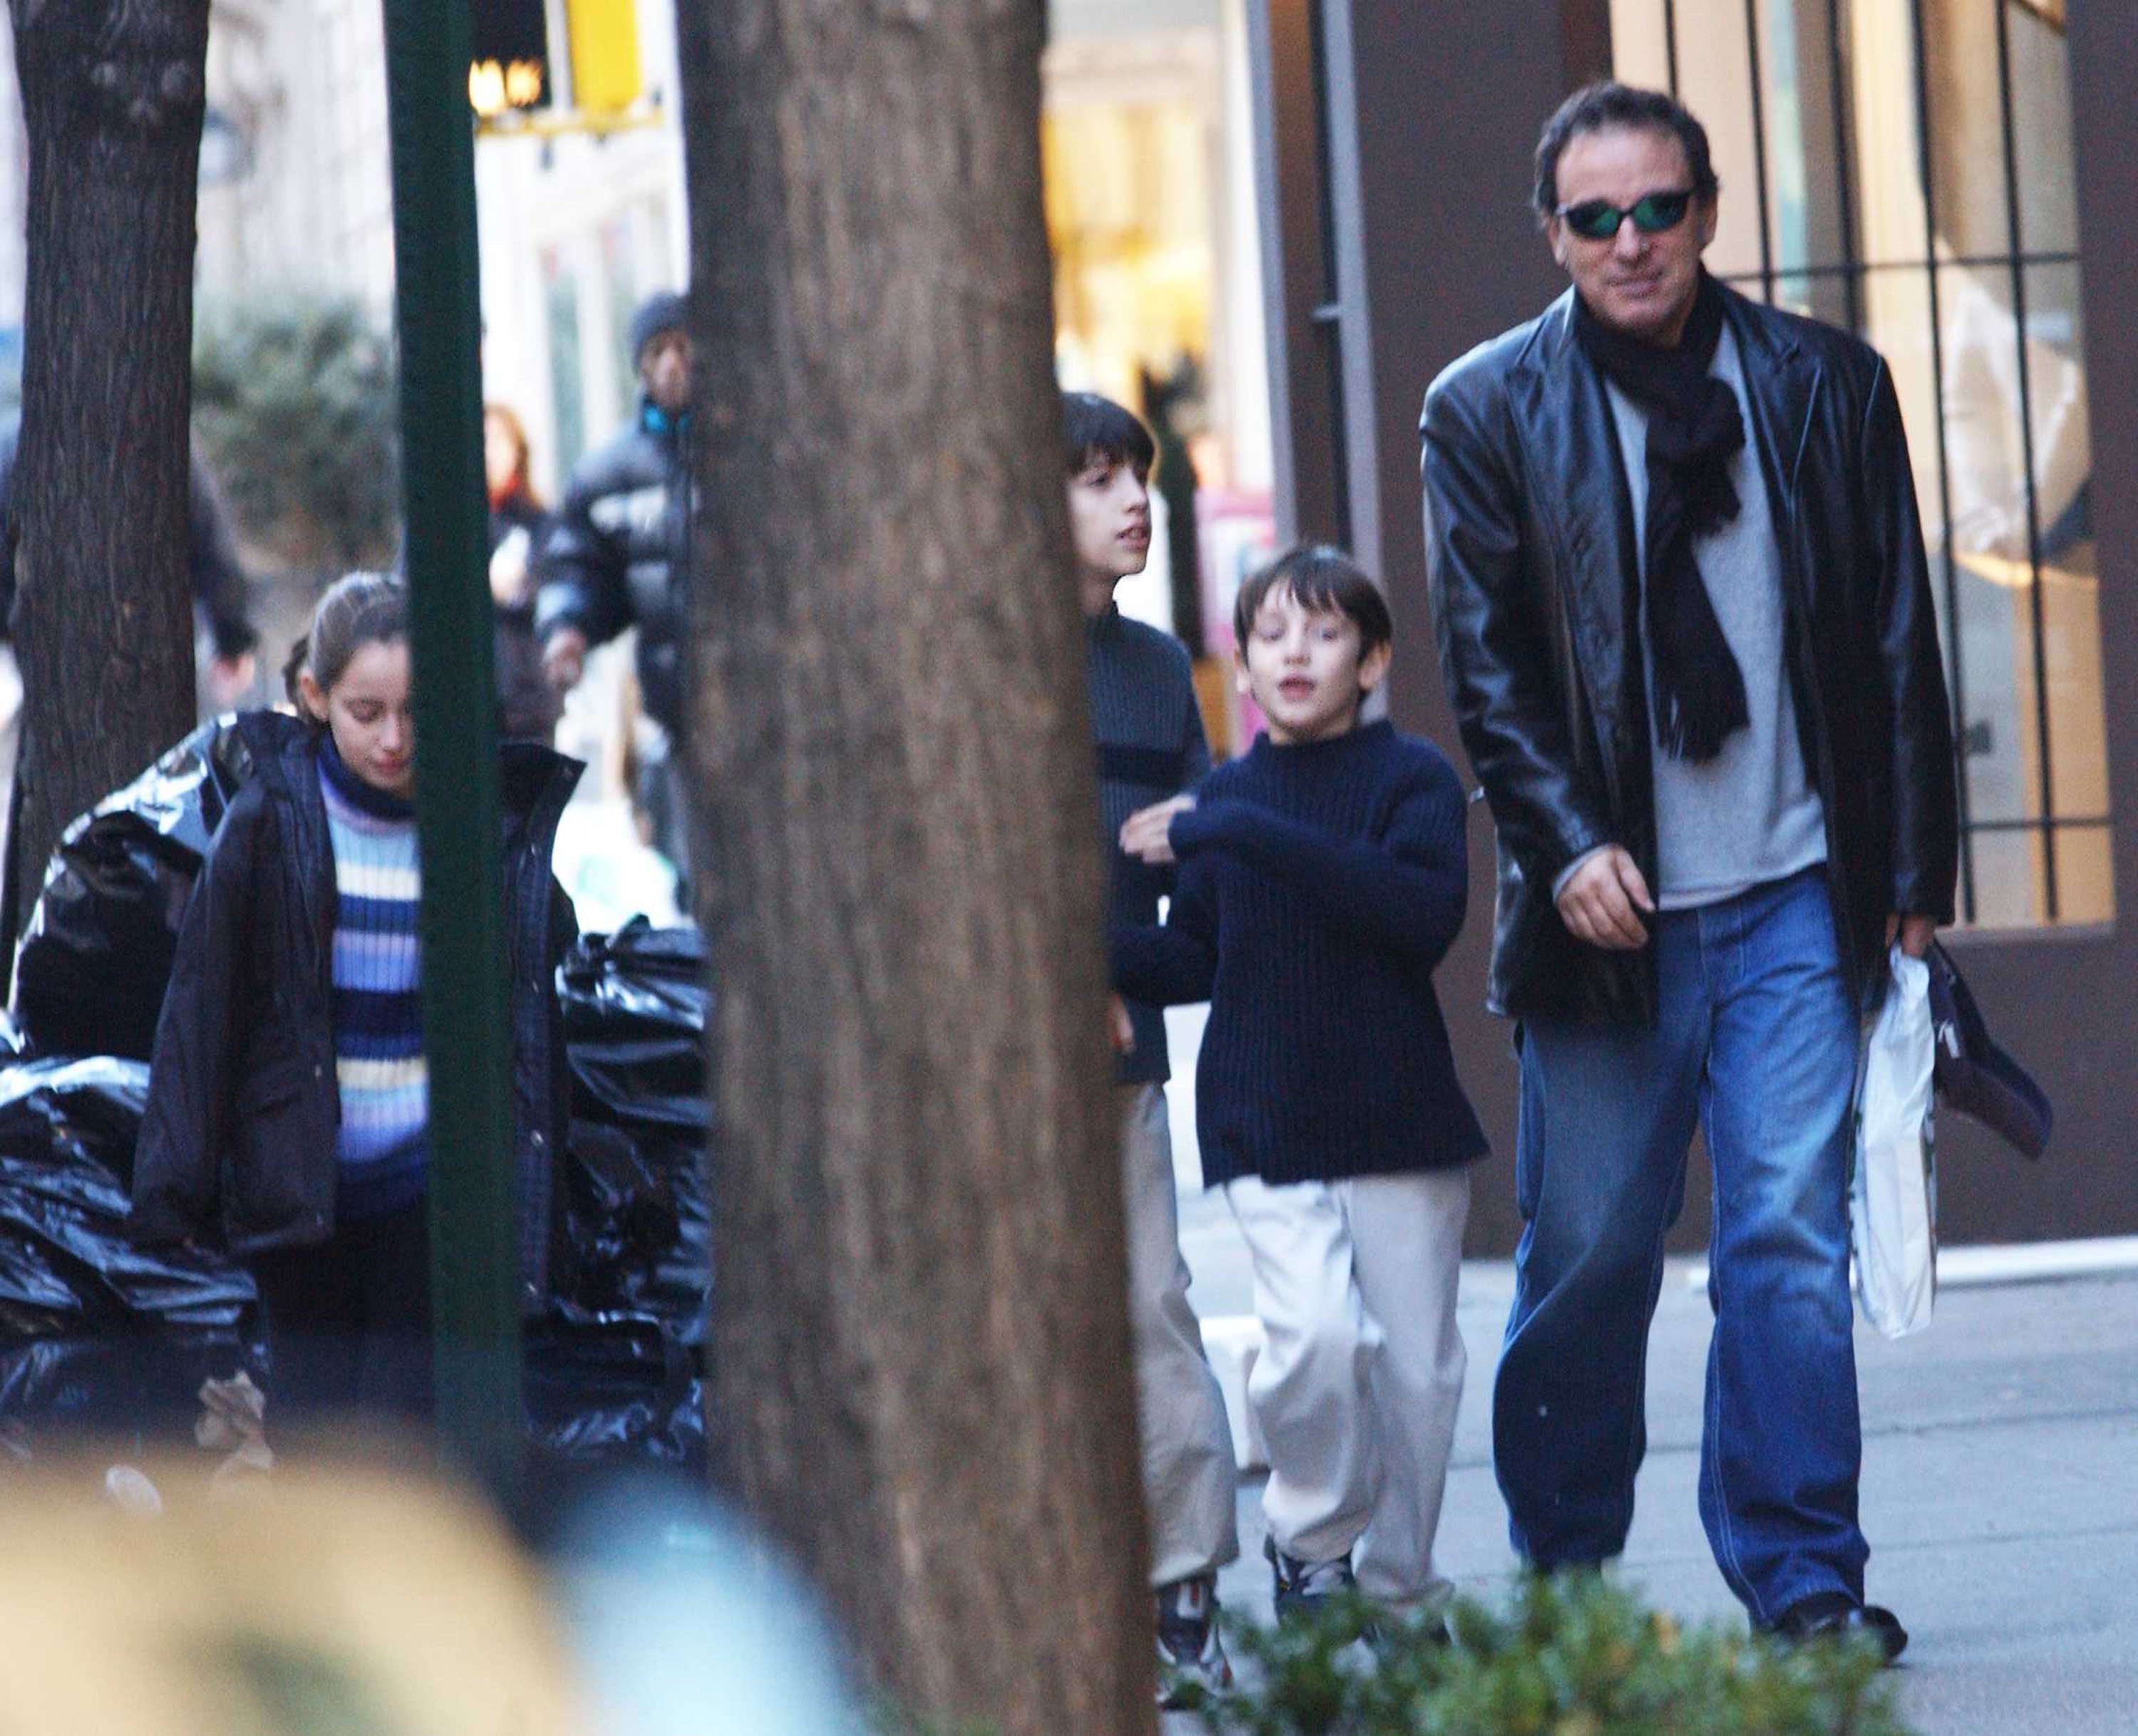 Musician Bruce Springsteen and his children Jessica (L), Evan (C), and Sam (R) spotted taking a walk on February 18, 2002 in New York City. | Source: Getty Images